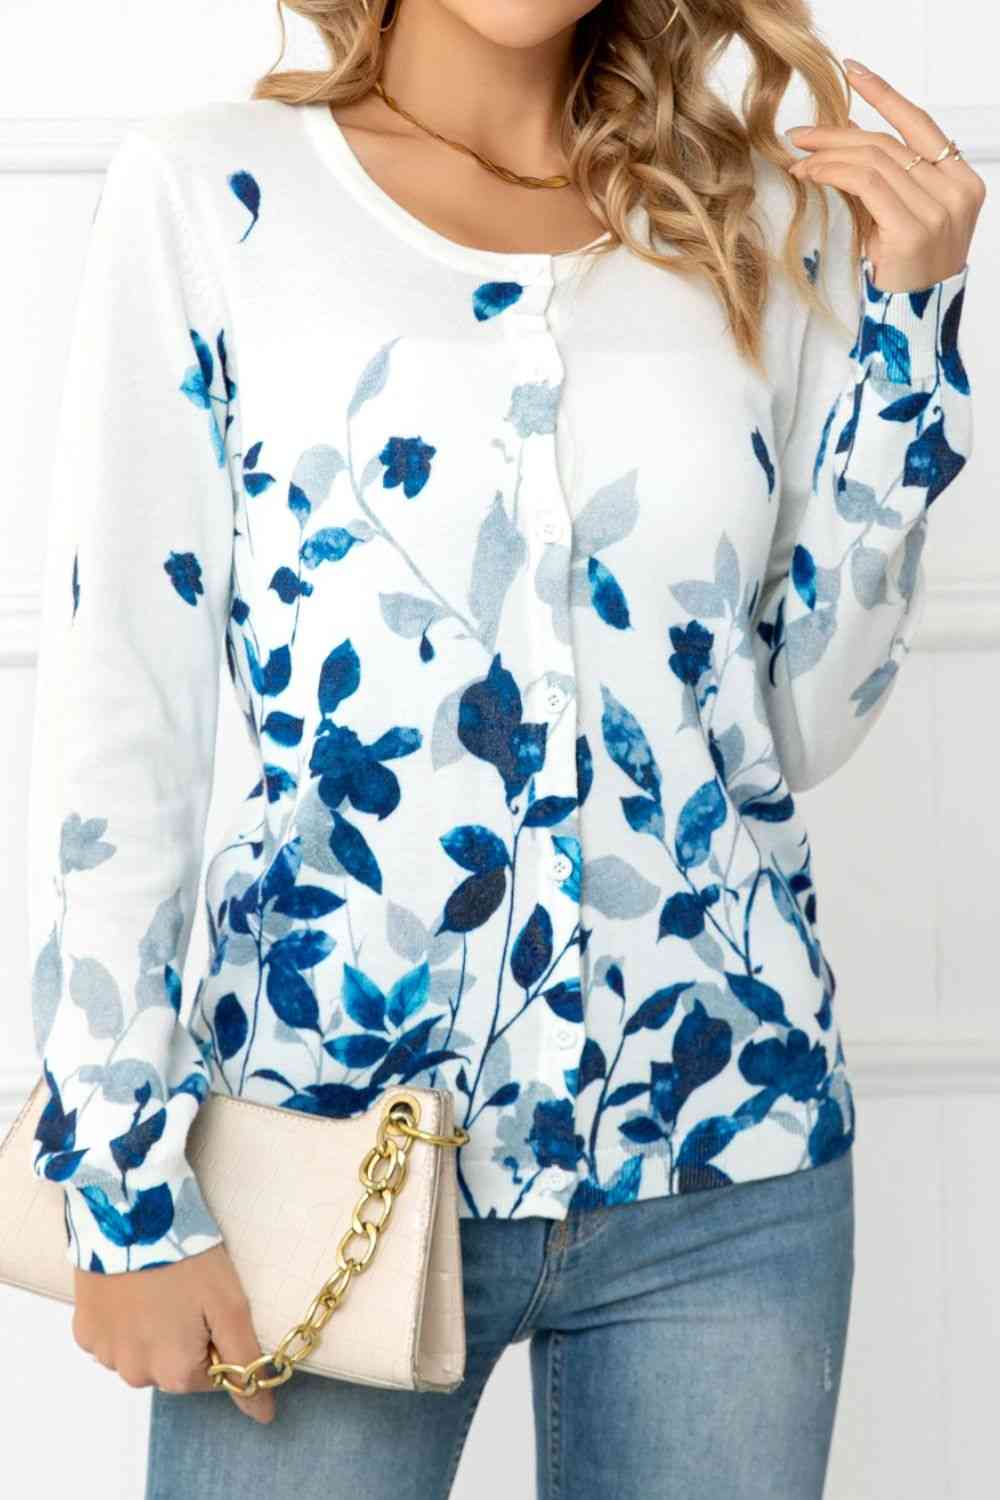 Woven Right Floral Button Front Round Neck Cardigan